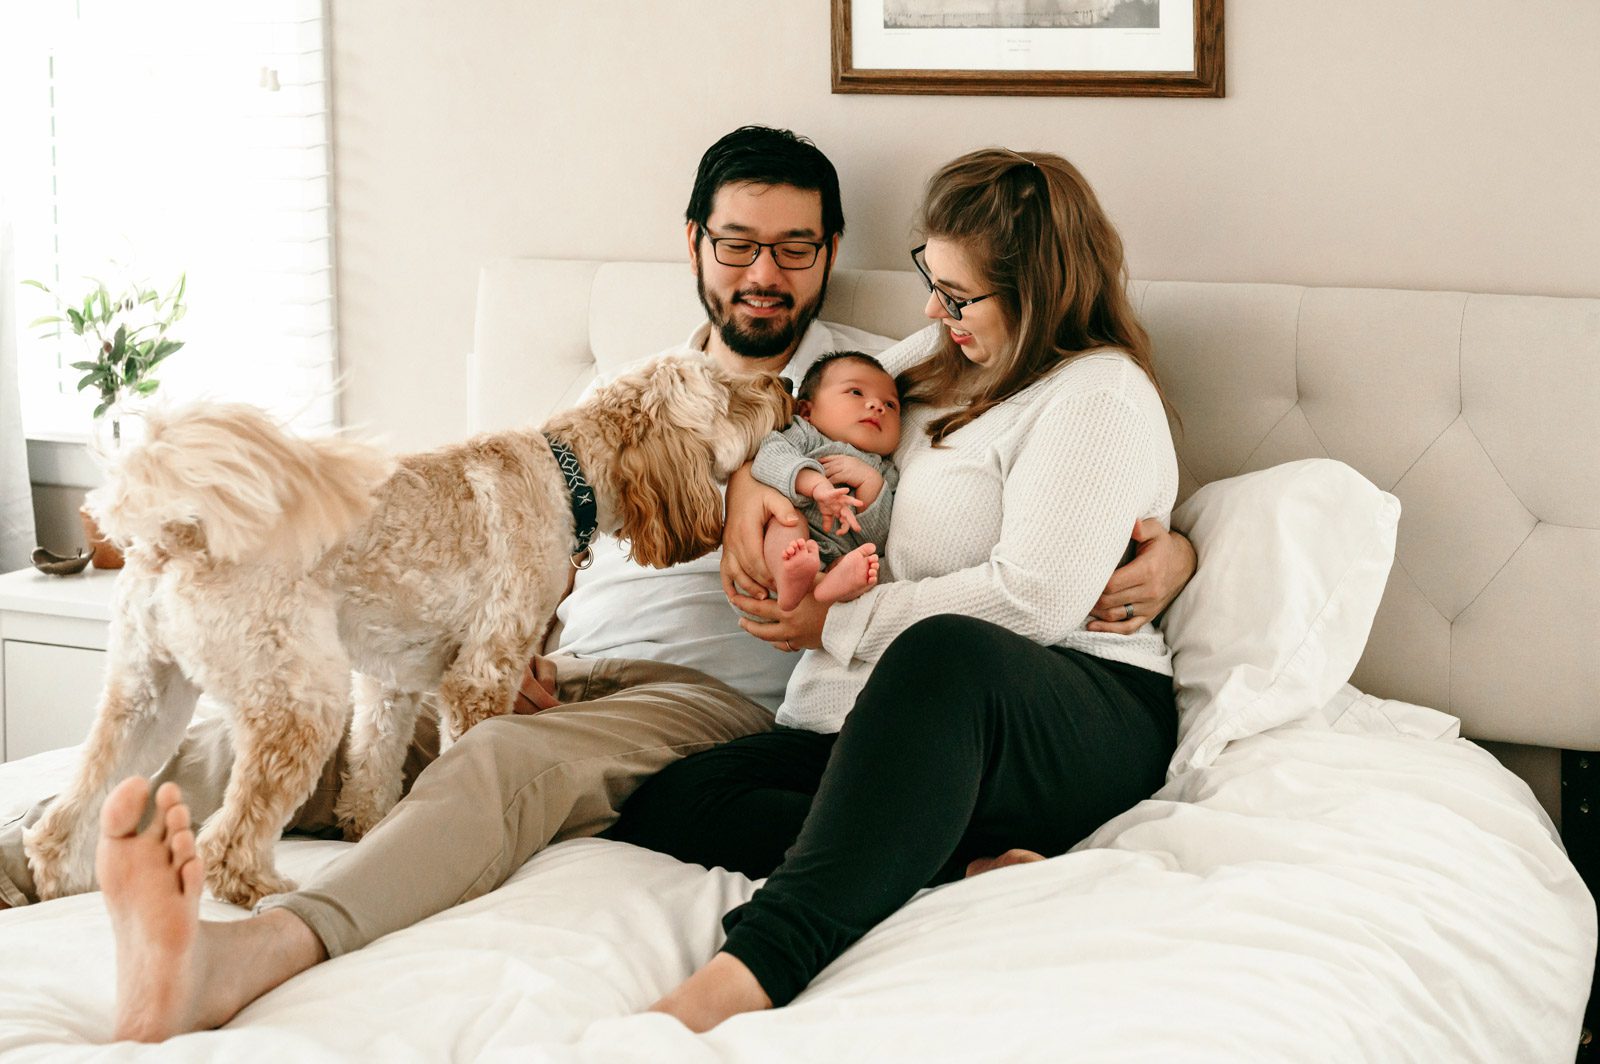 New parents sitting on their bed holding their newborn baby boy and laughing as their pet dog sniffs the baby during an in home newborn session